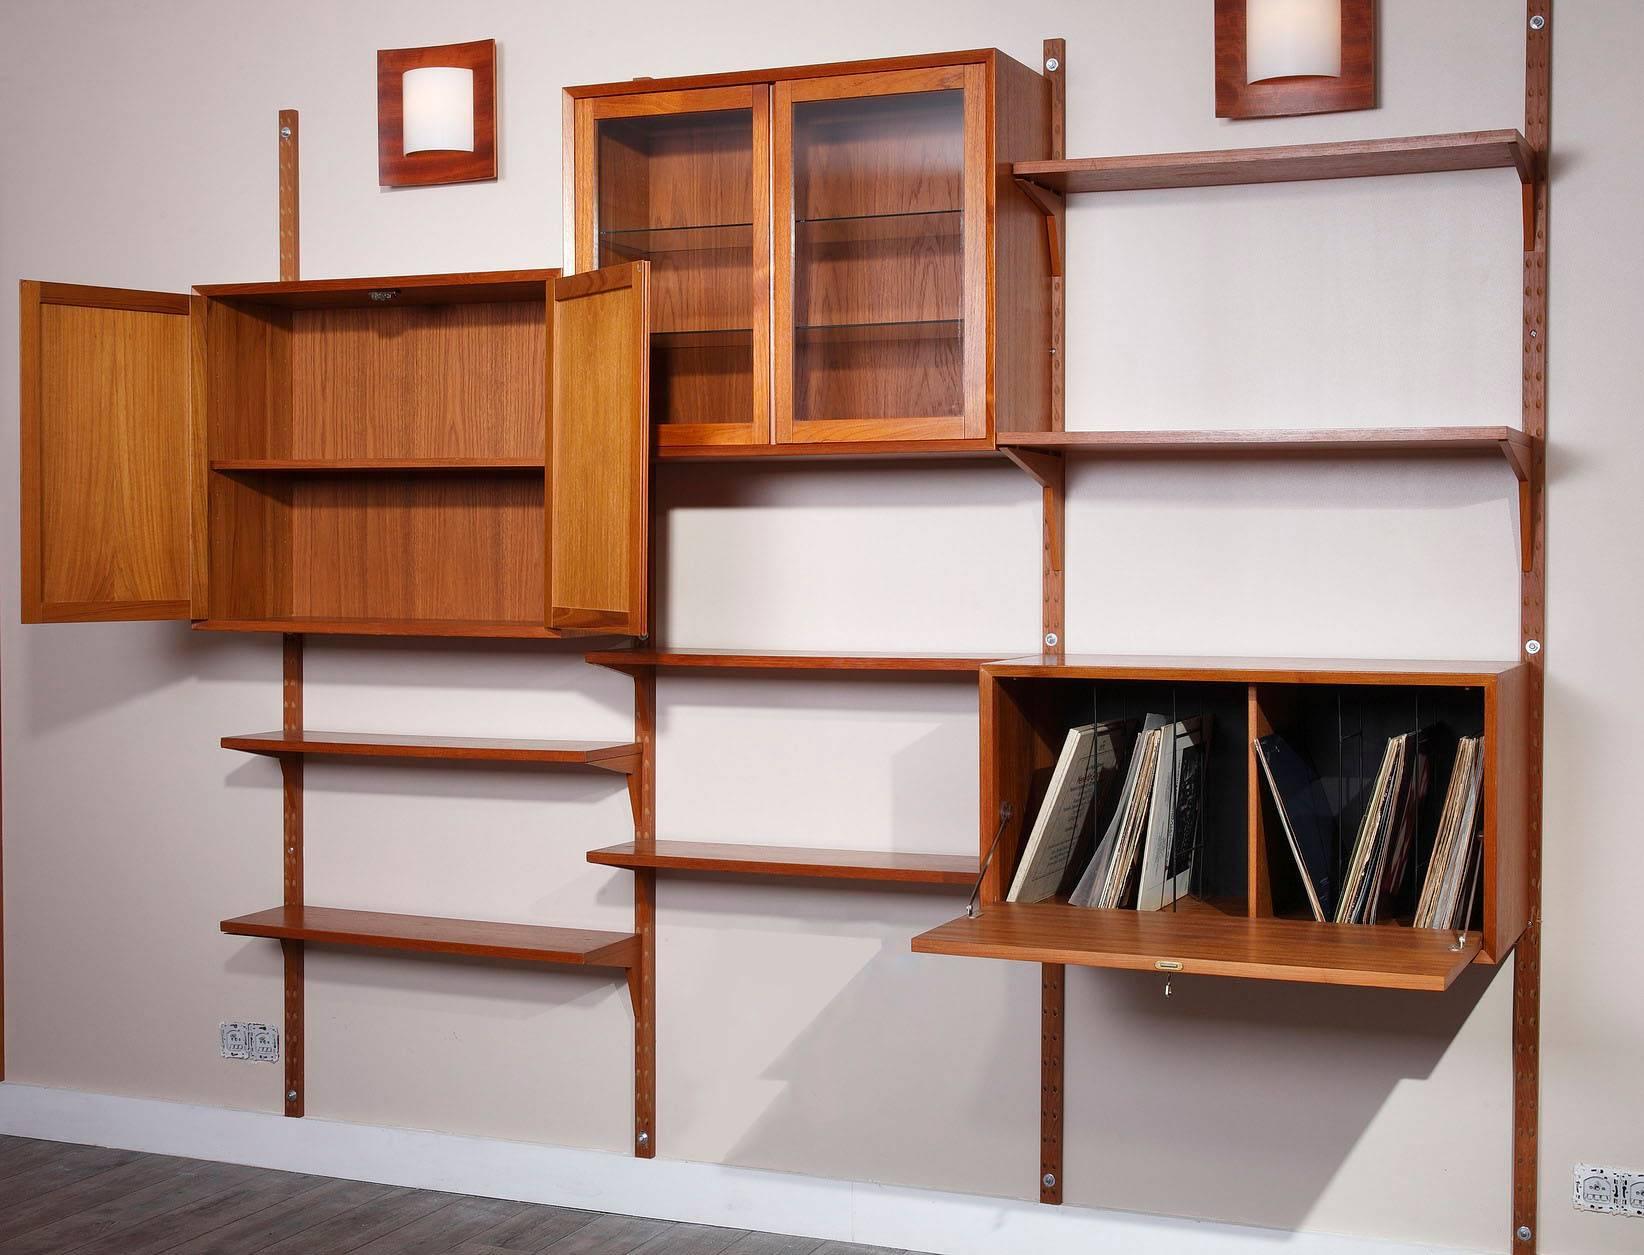 Modular wall system designed by Poul Cadovius in the 1950s, crafted in teak, provided with wooden fixations. It is composed of four vertical ladders with six shelves and three containers as follow: One container with lateral doors, one container